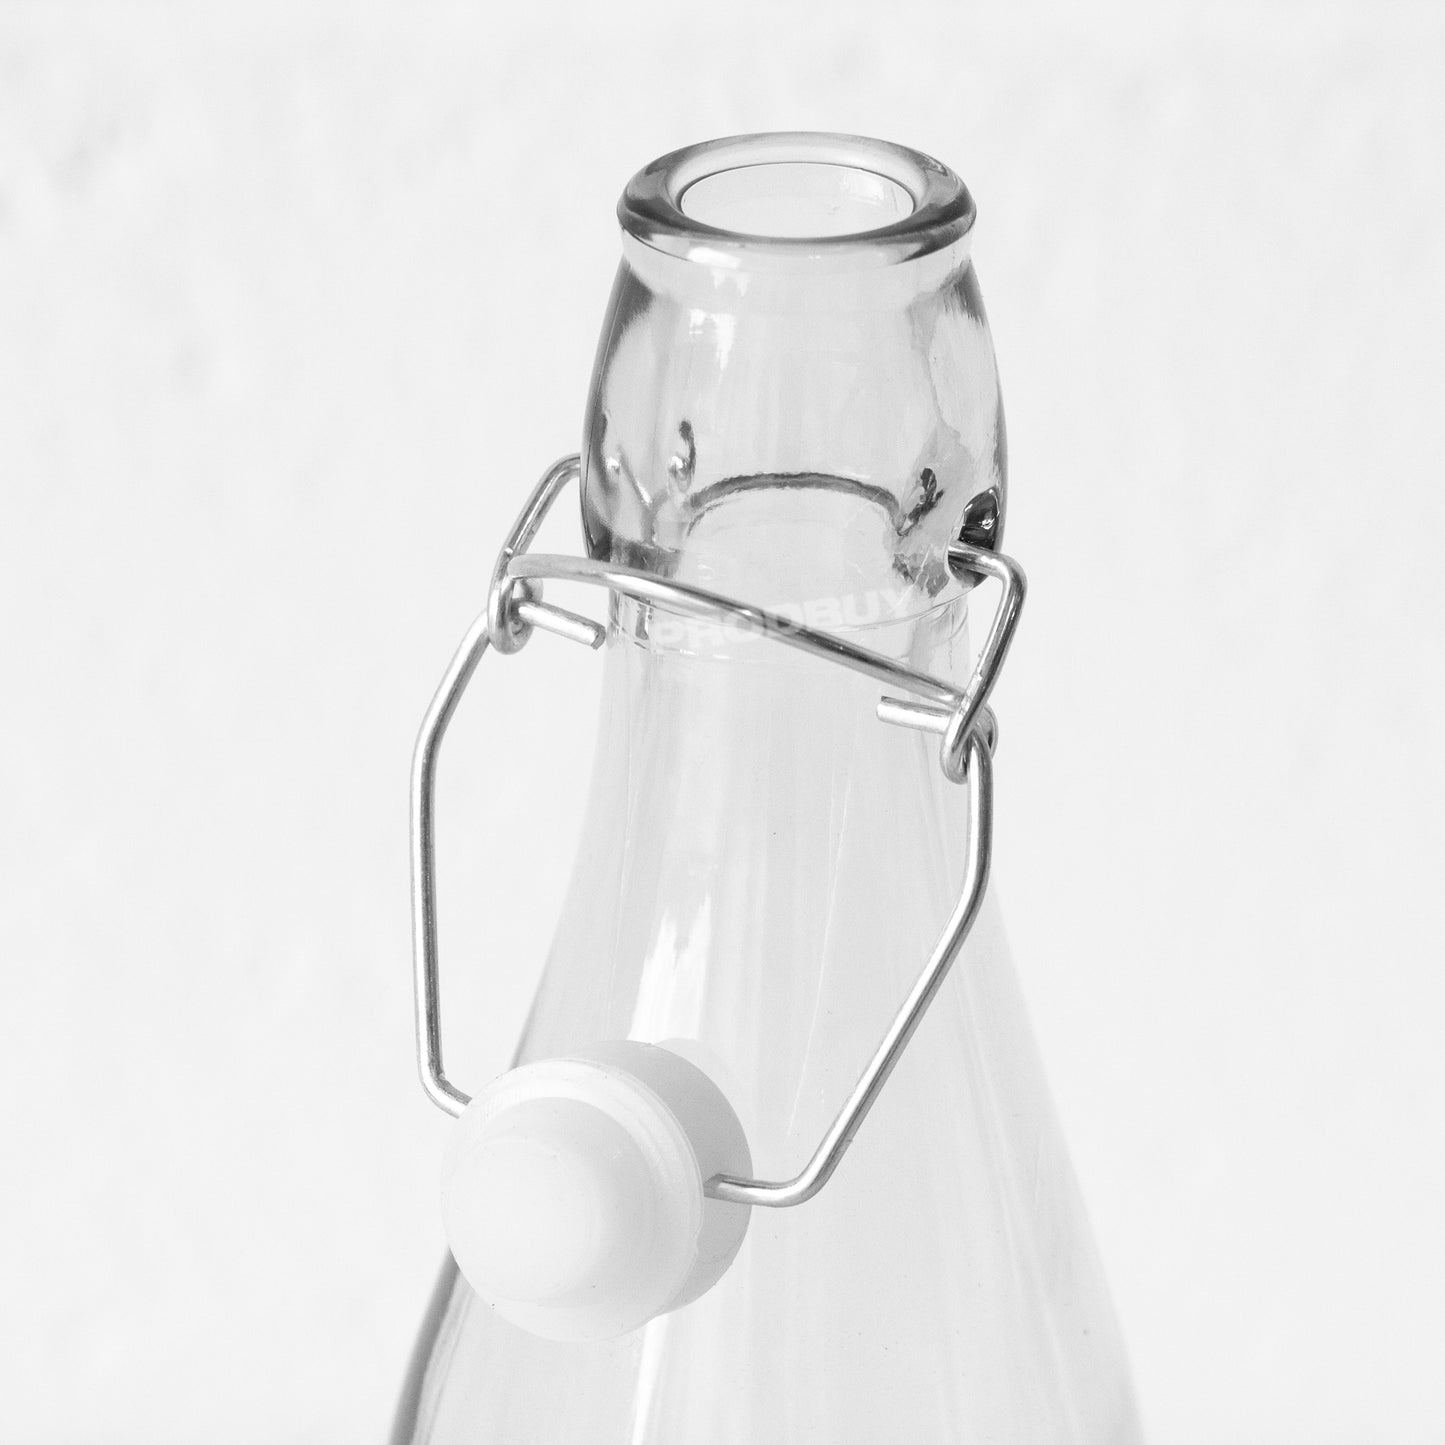 Set of 6 Glass Preserve 500ml Bottles with Clip Top Lids